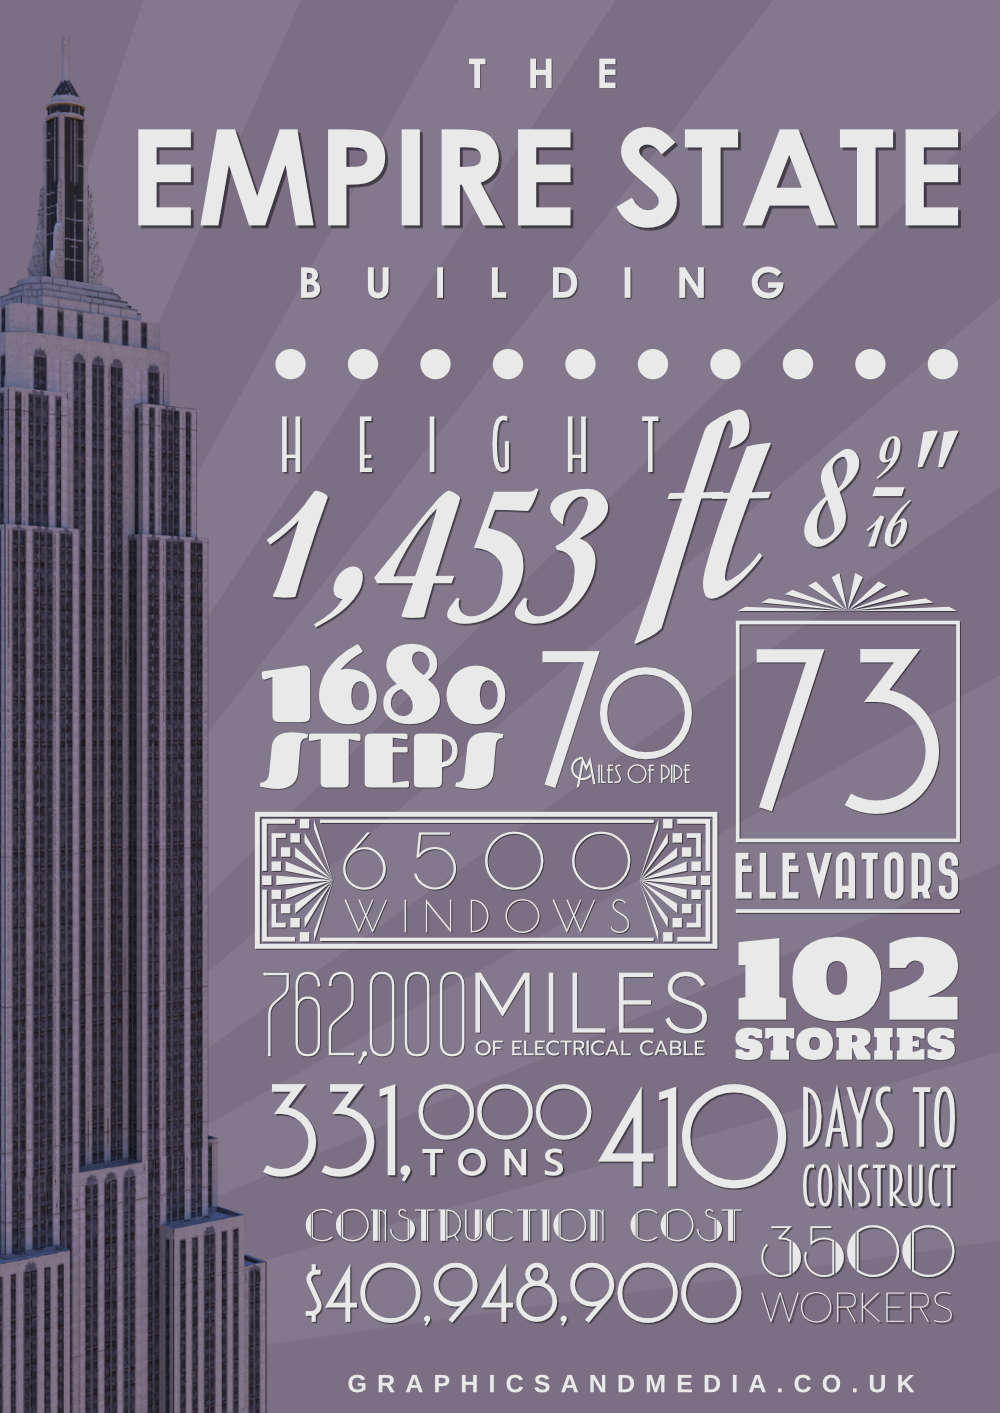 The Empire State Building Facts and Figures for Graphic Design for Yorkshire and North Yorkshire